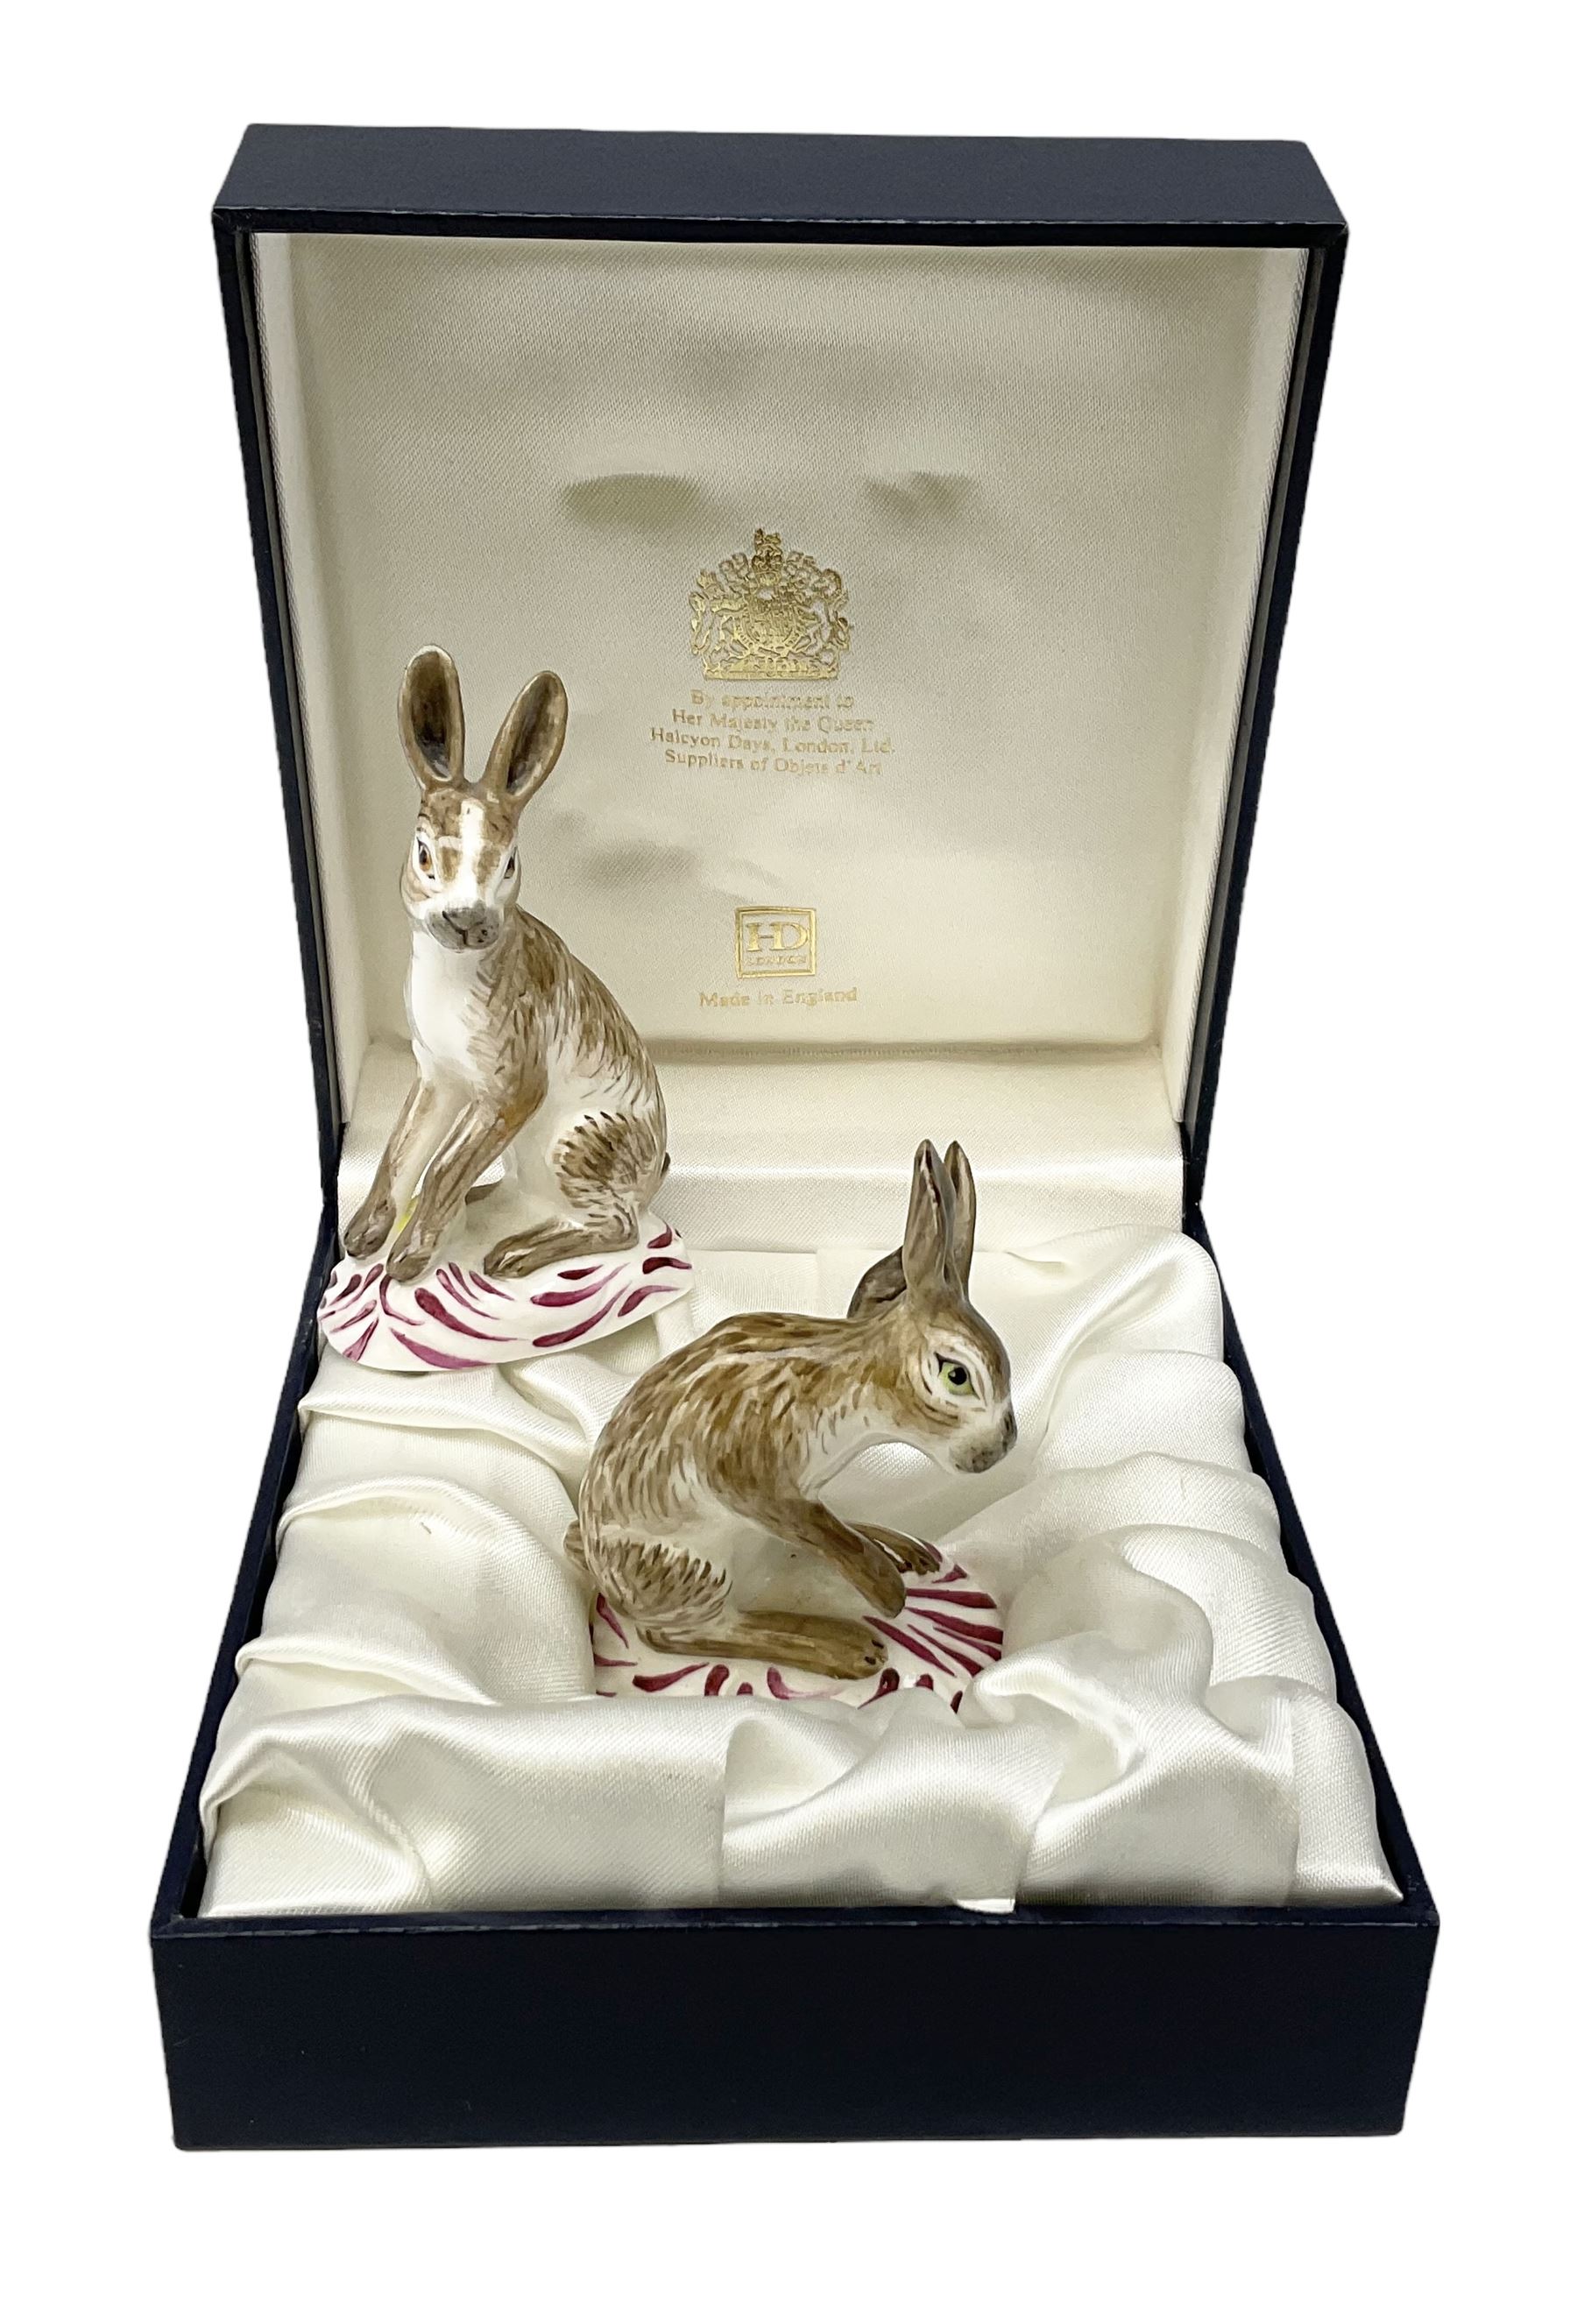 Two Halcyon Days porcelain figures of hares